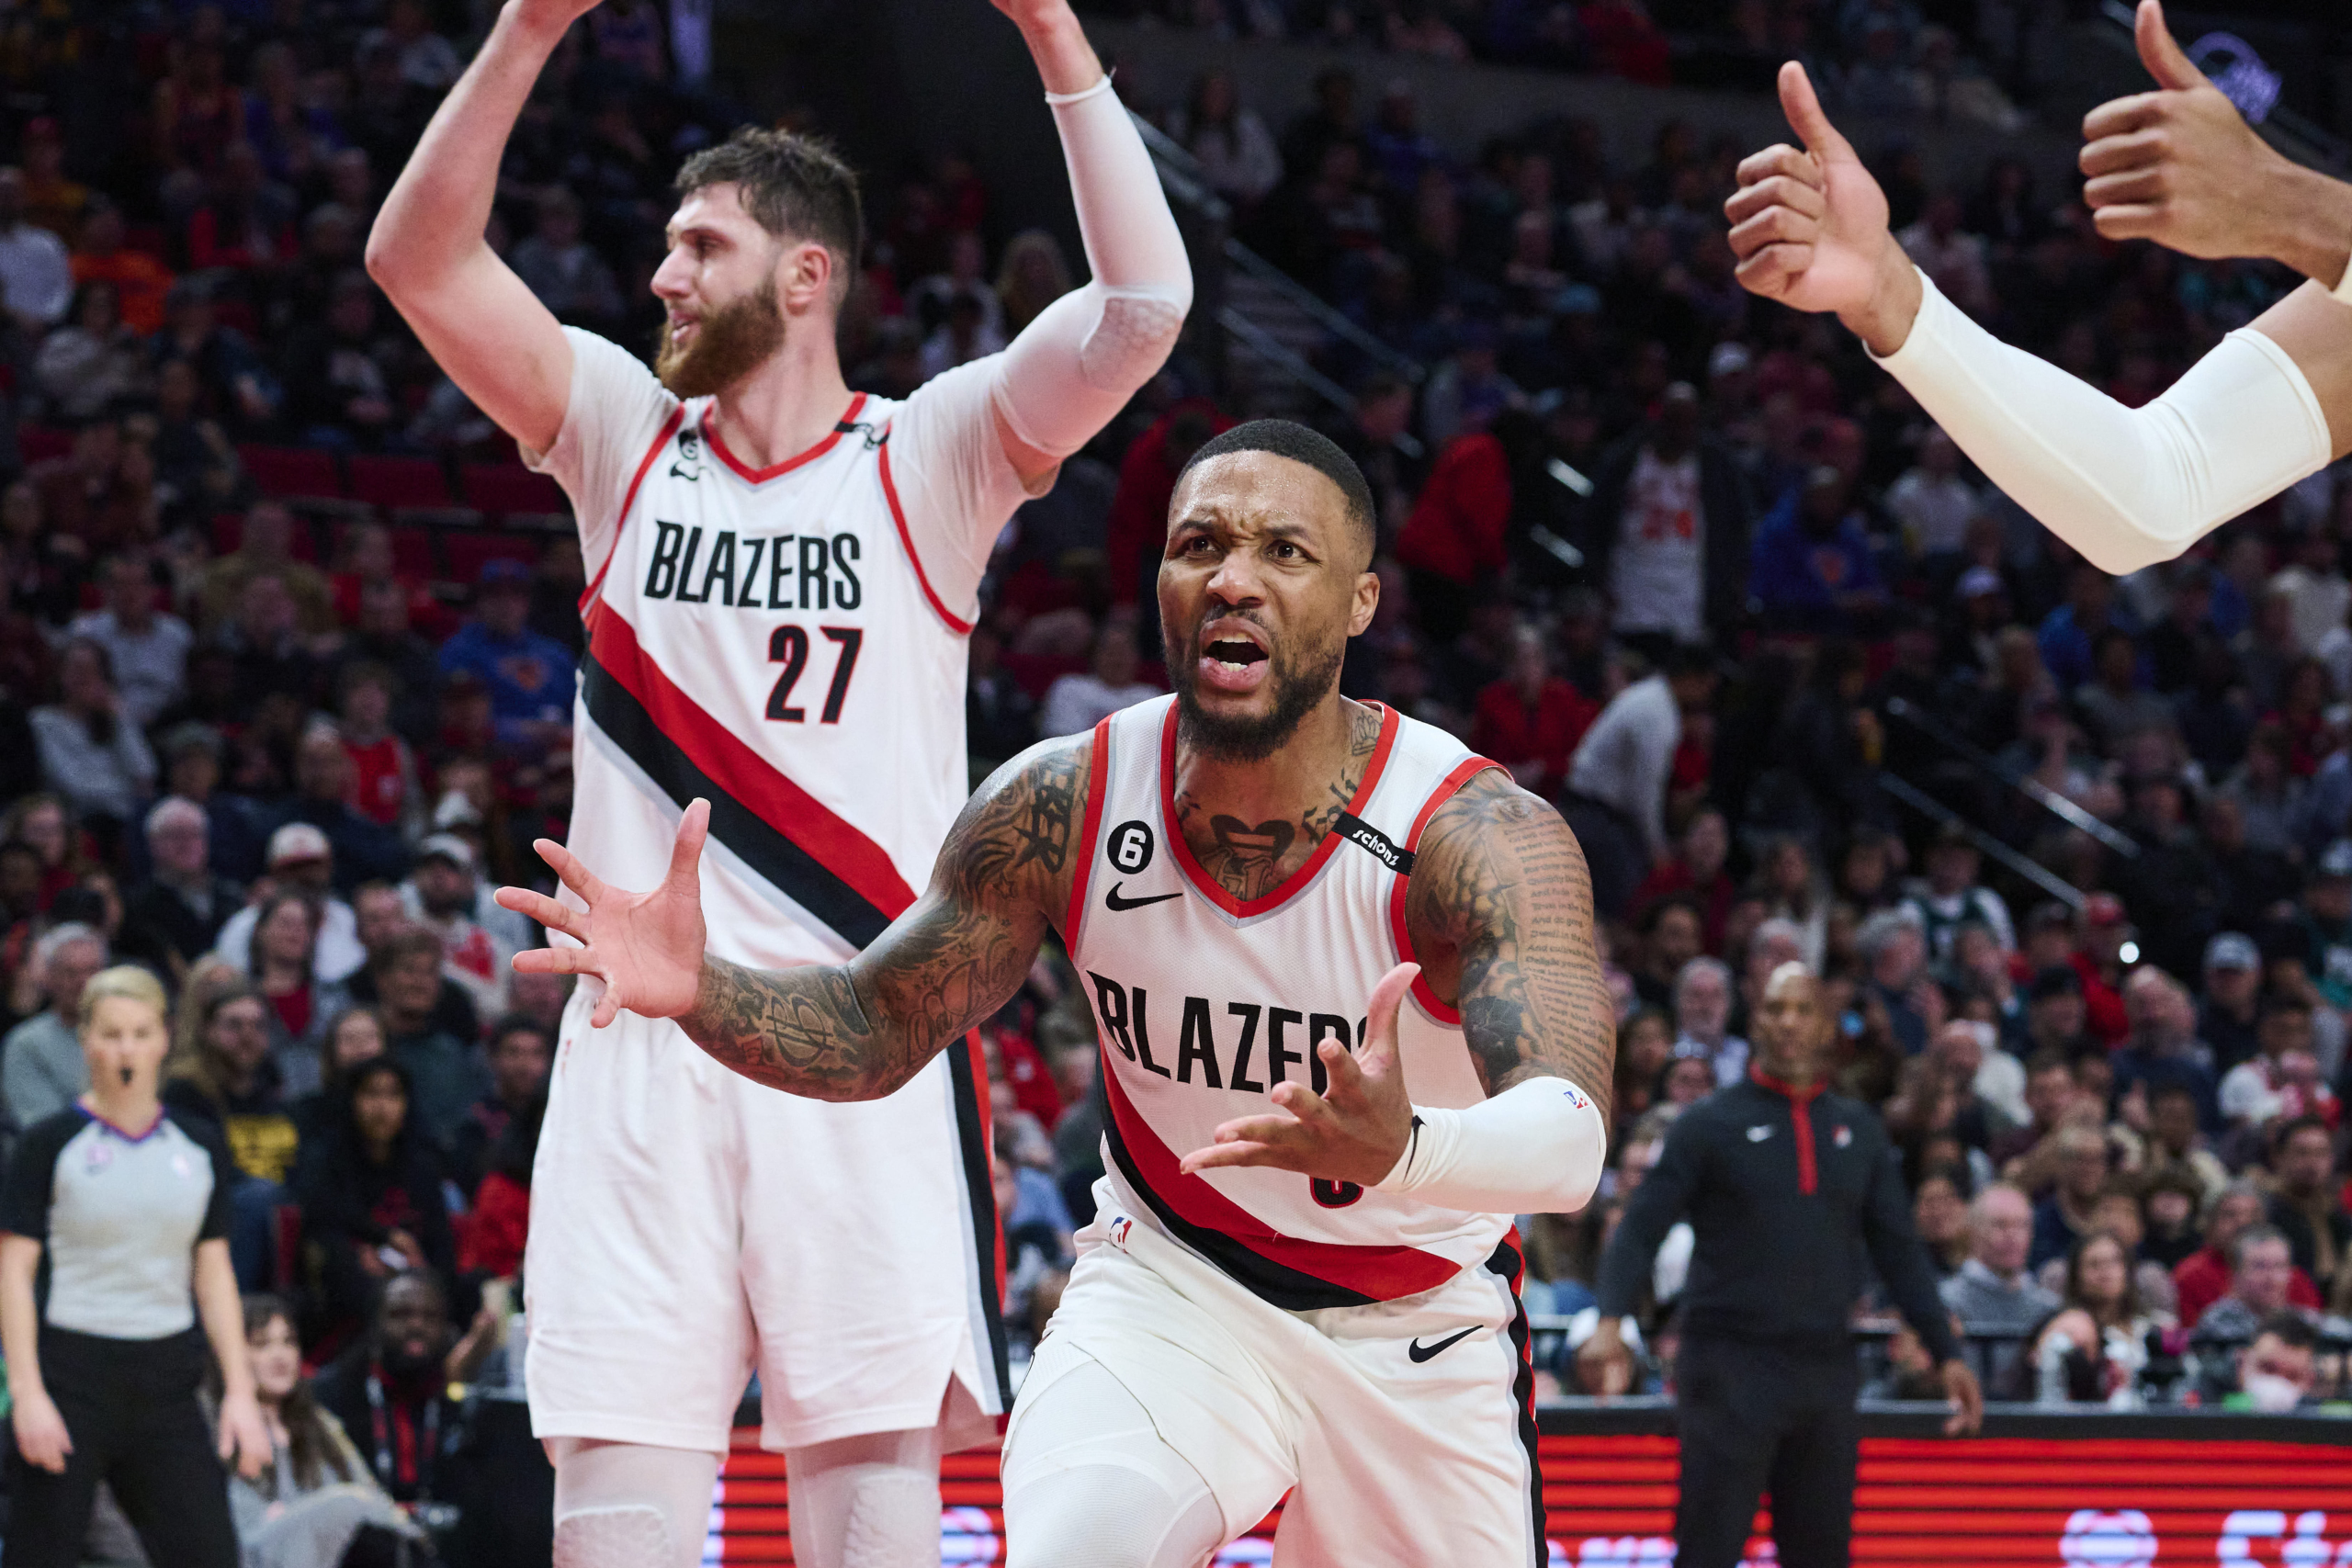 What could the future hold for Damian Lillard? - Deseret News